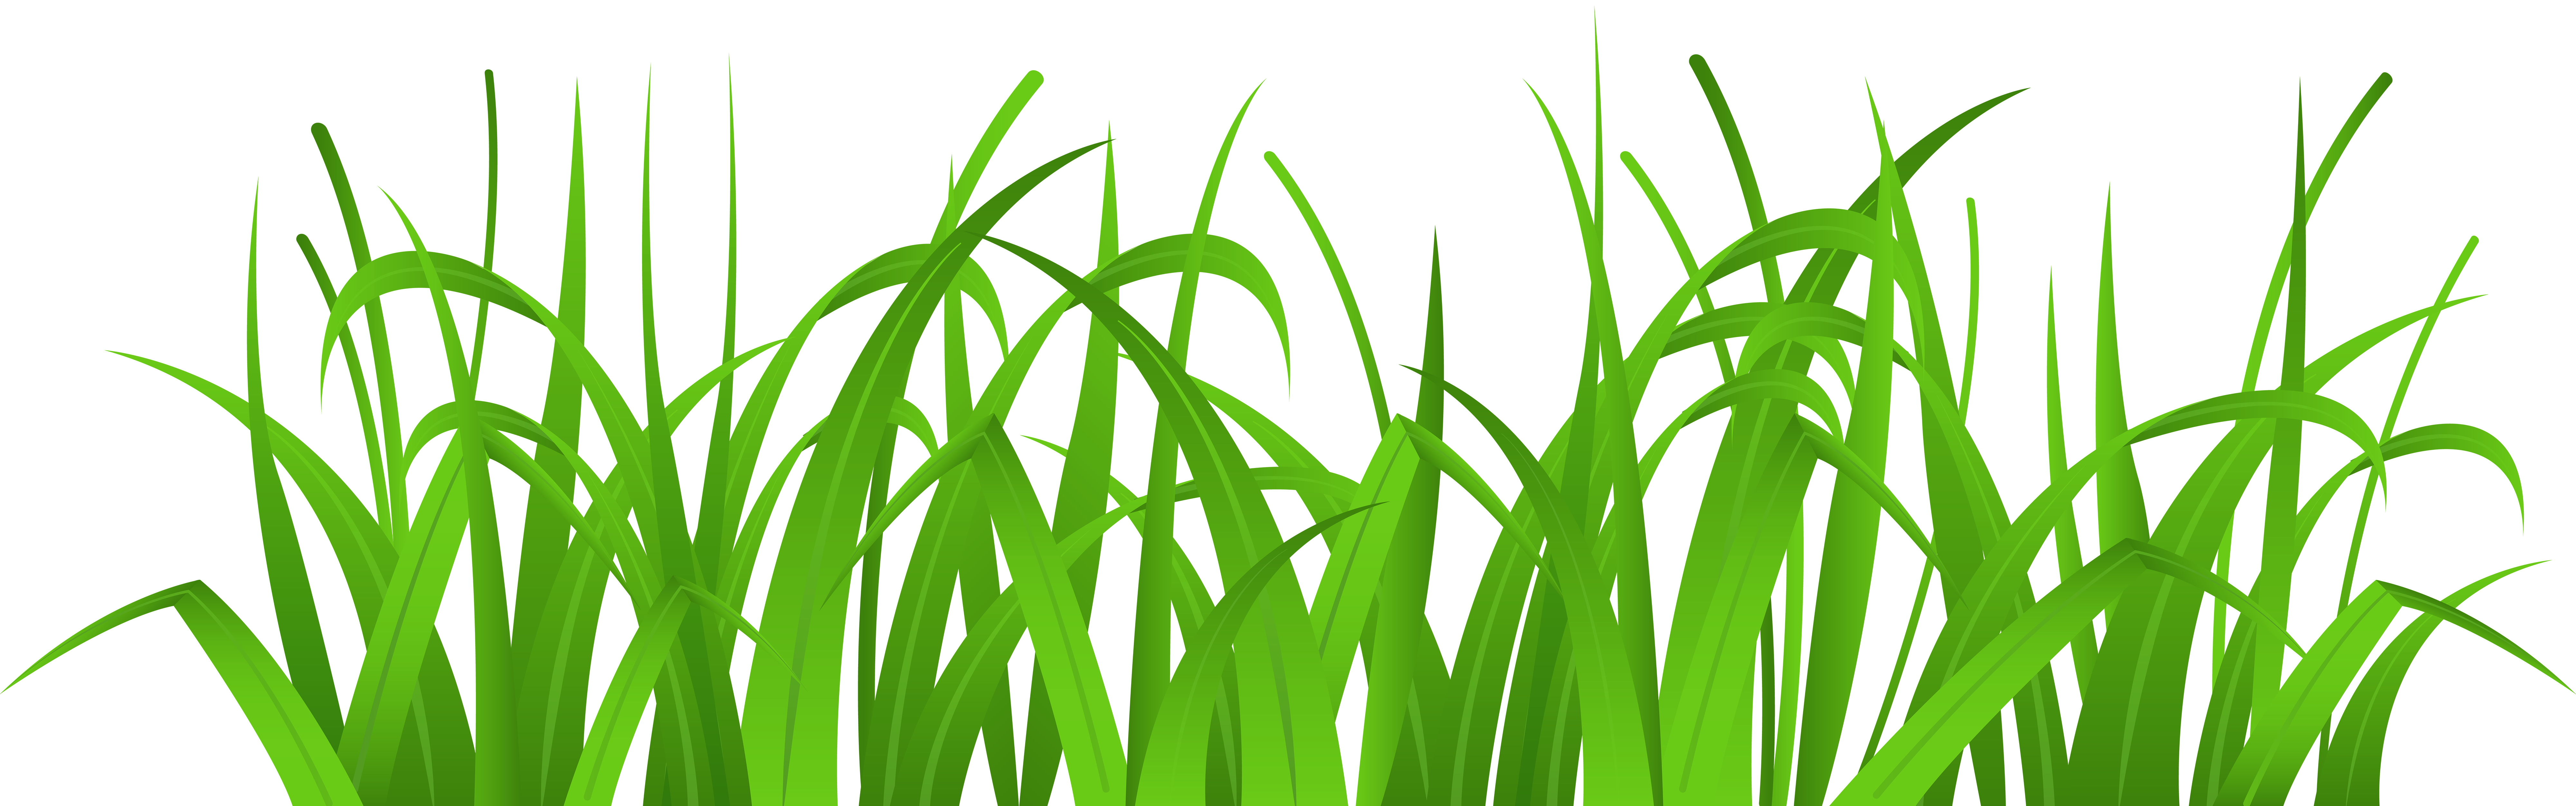 png clipart grass - photo #5